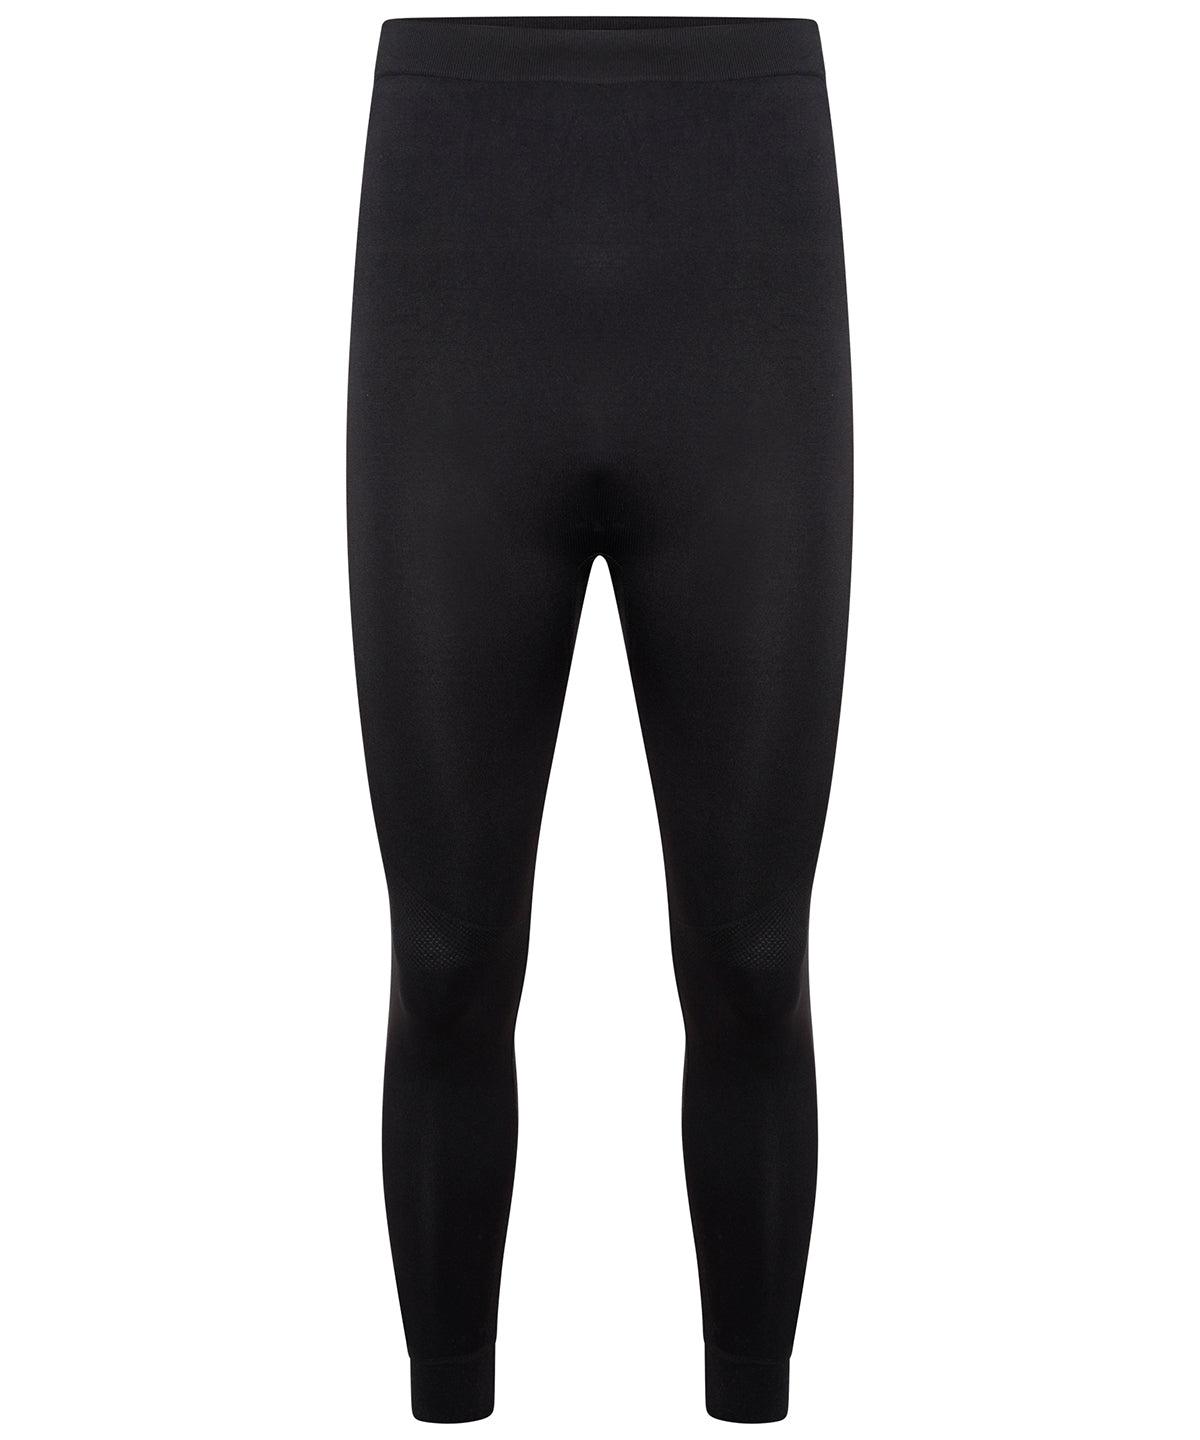 Black - Zone In base pants Baselayers Dare 2B Baselayers, New For 2021, New In Autumn Winter, New In Mid Year Schoolwear Centres